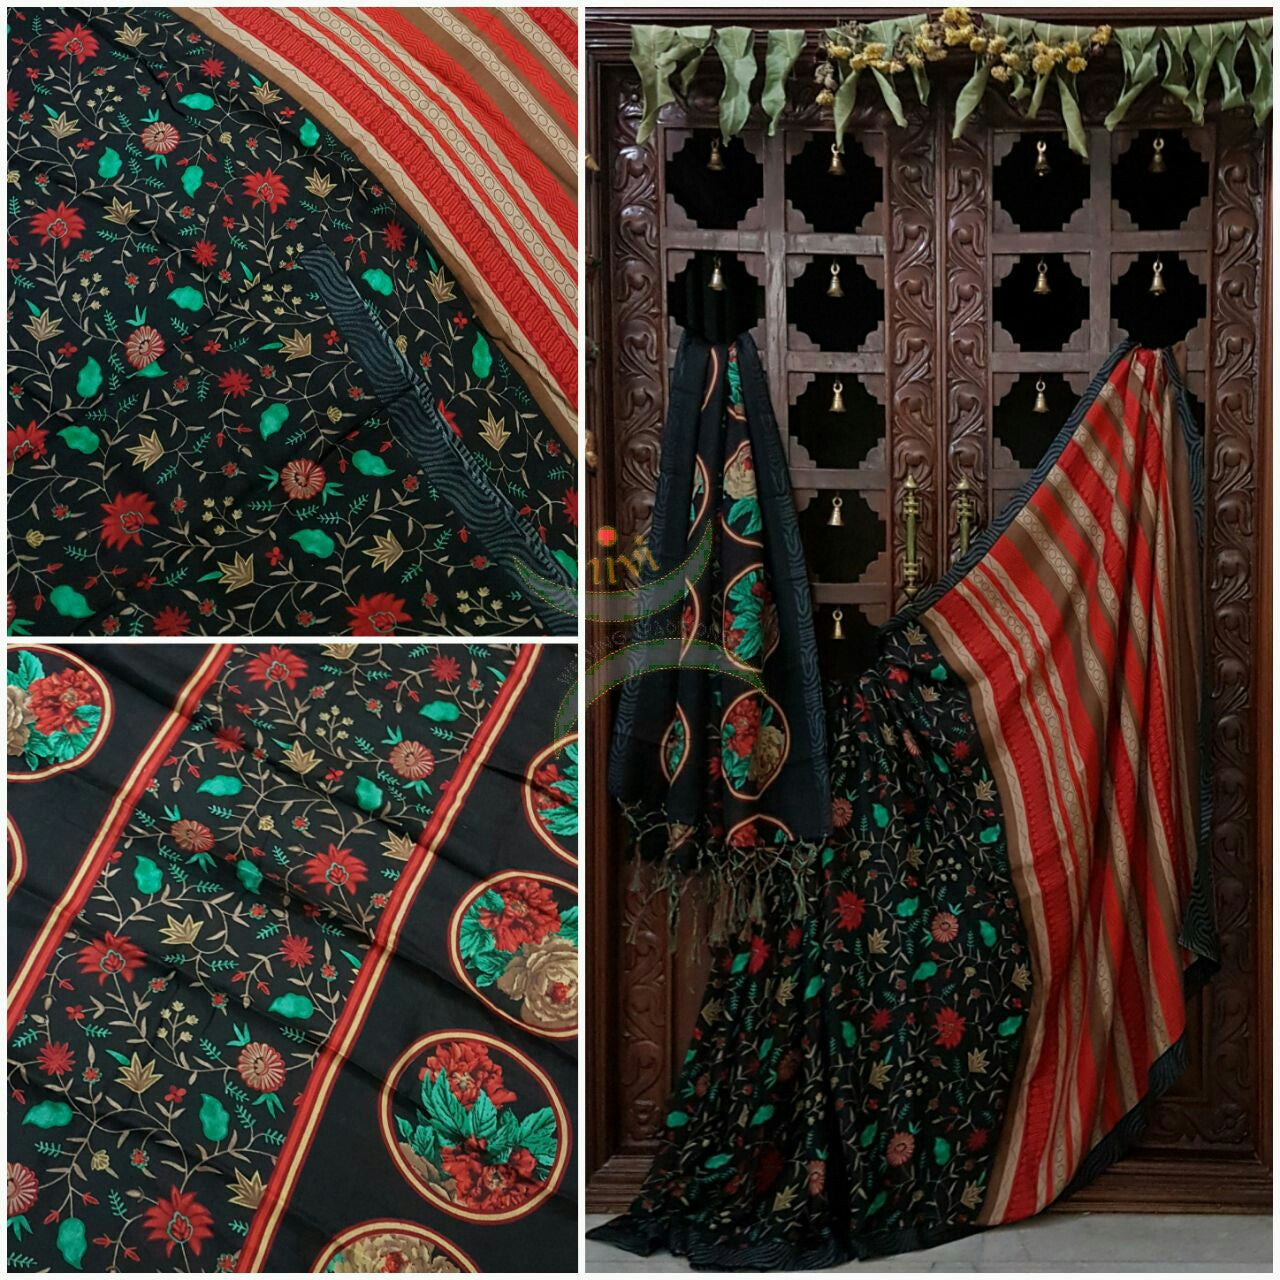 Black Semi Pashmina Printed Saree with floral print.Saree comes with Stole and contrasting printed blouse.